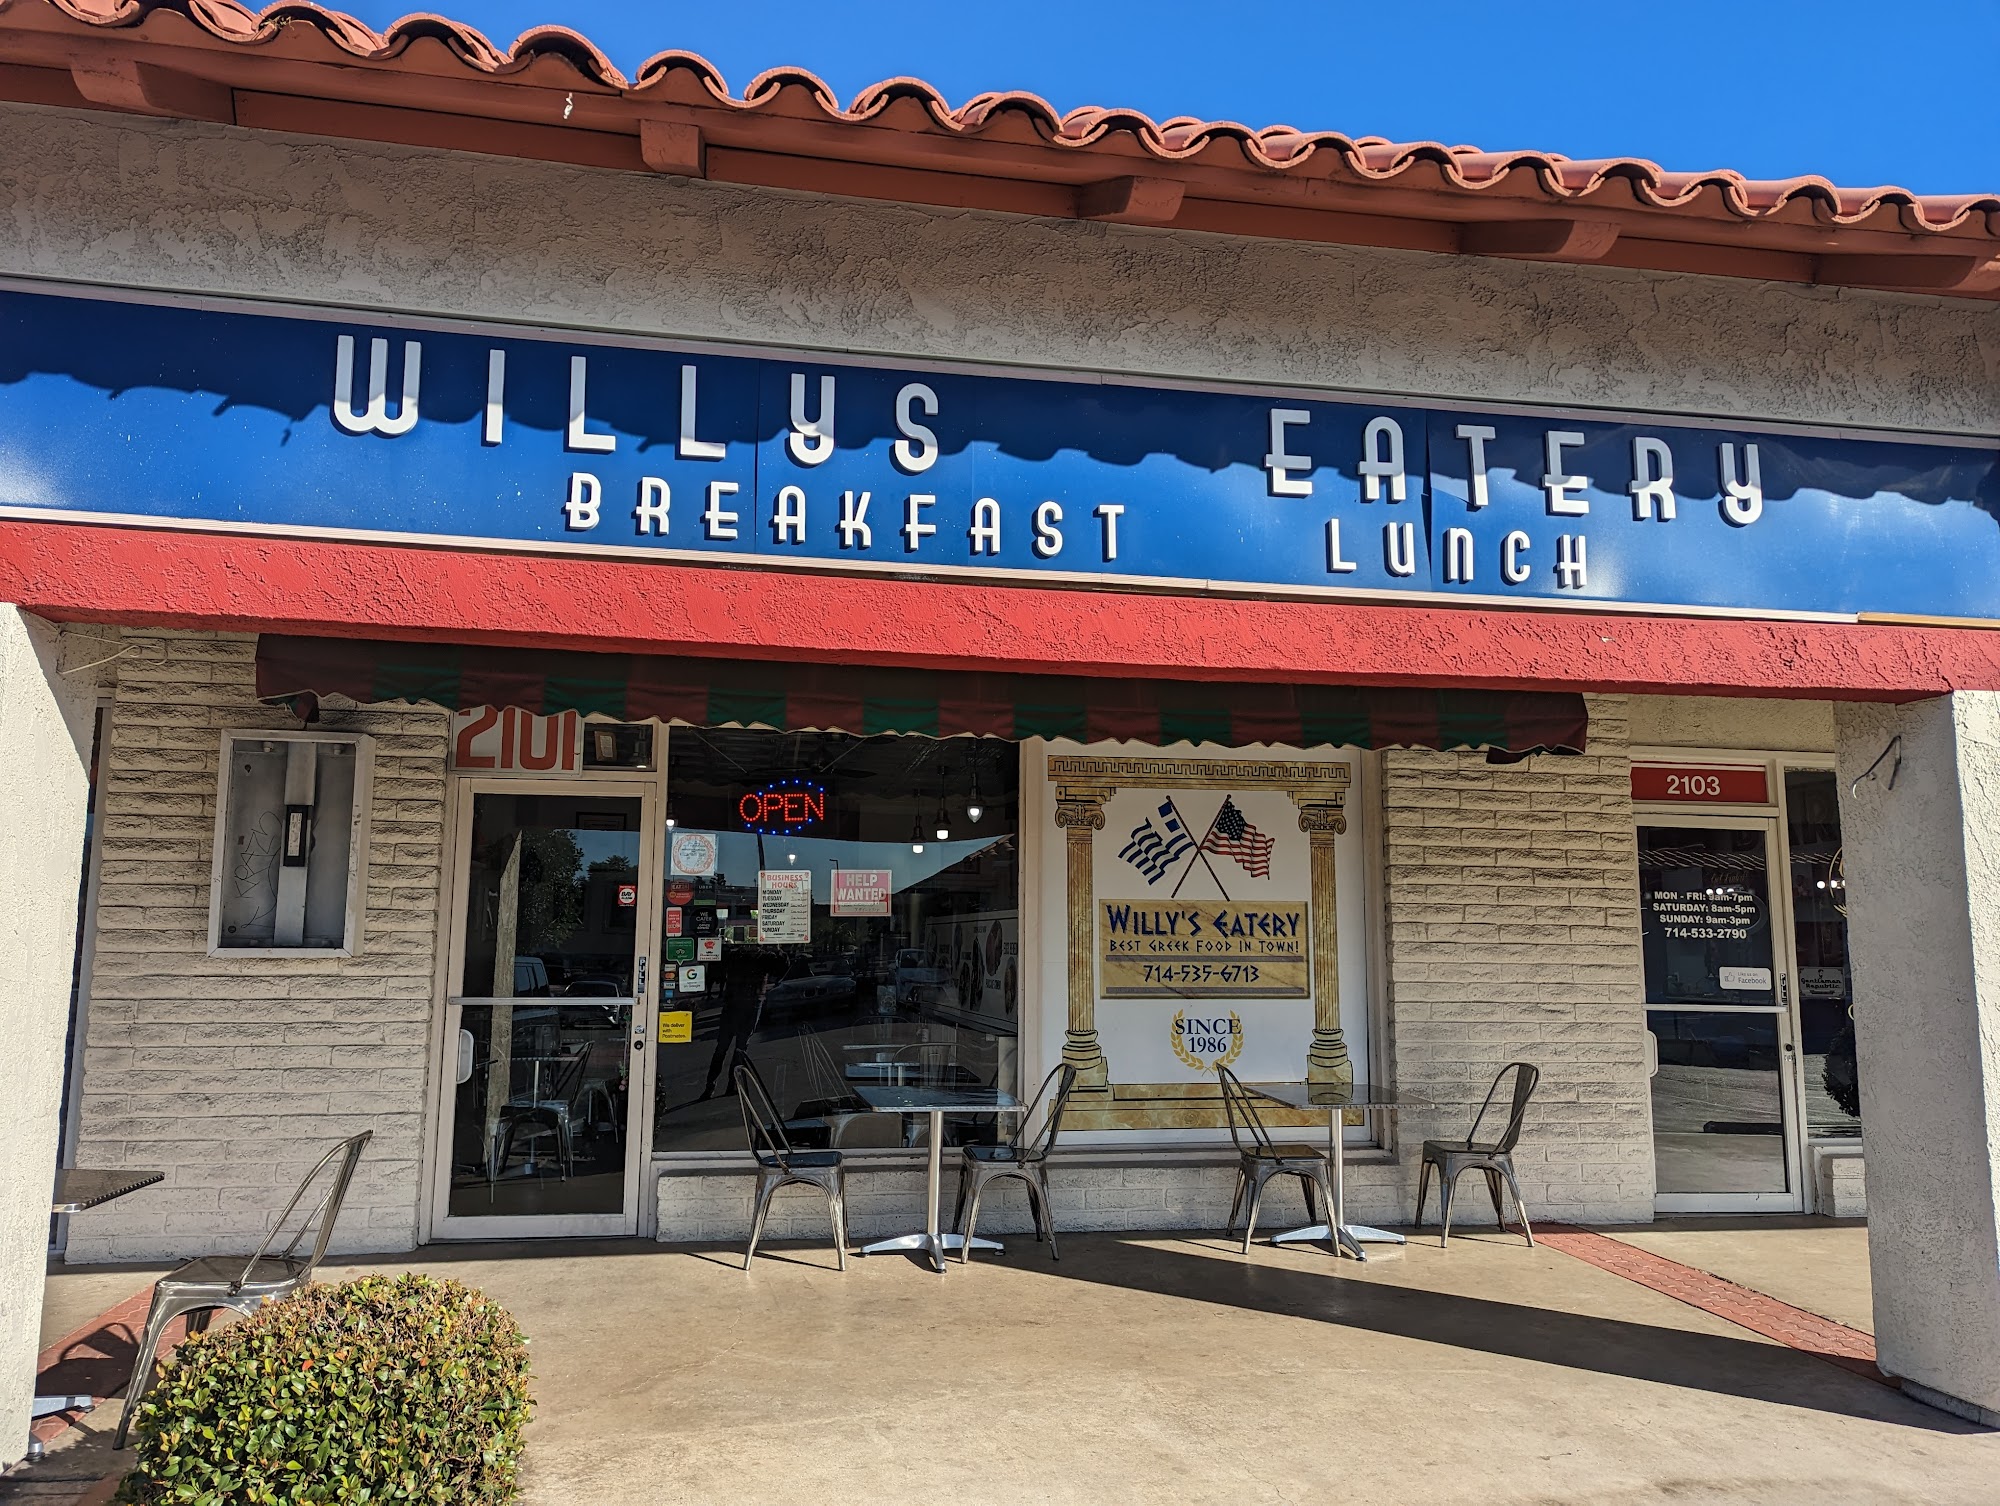 Willy's Eatery